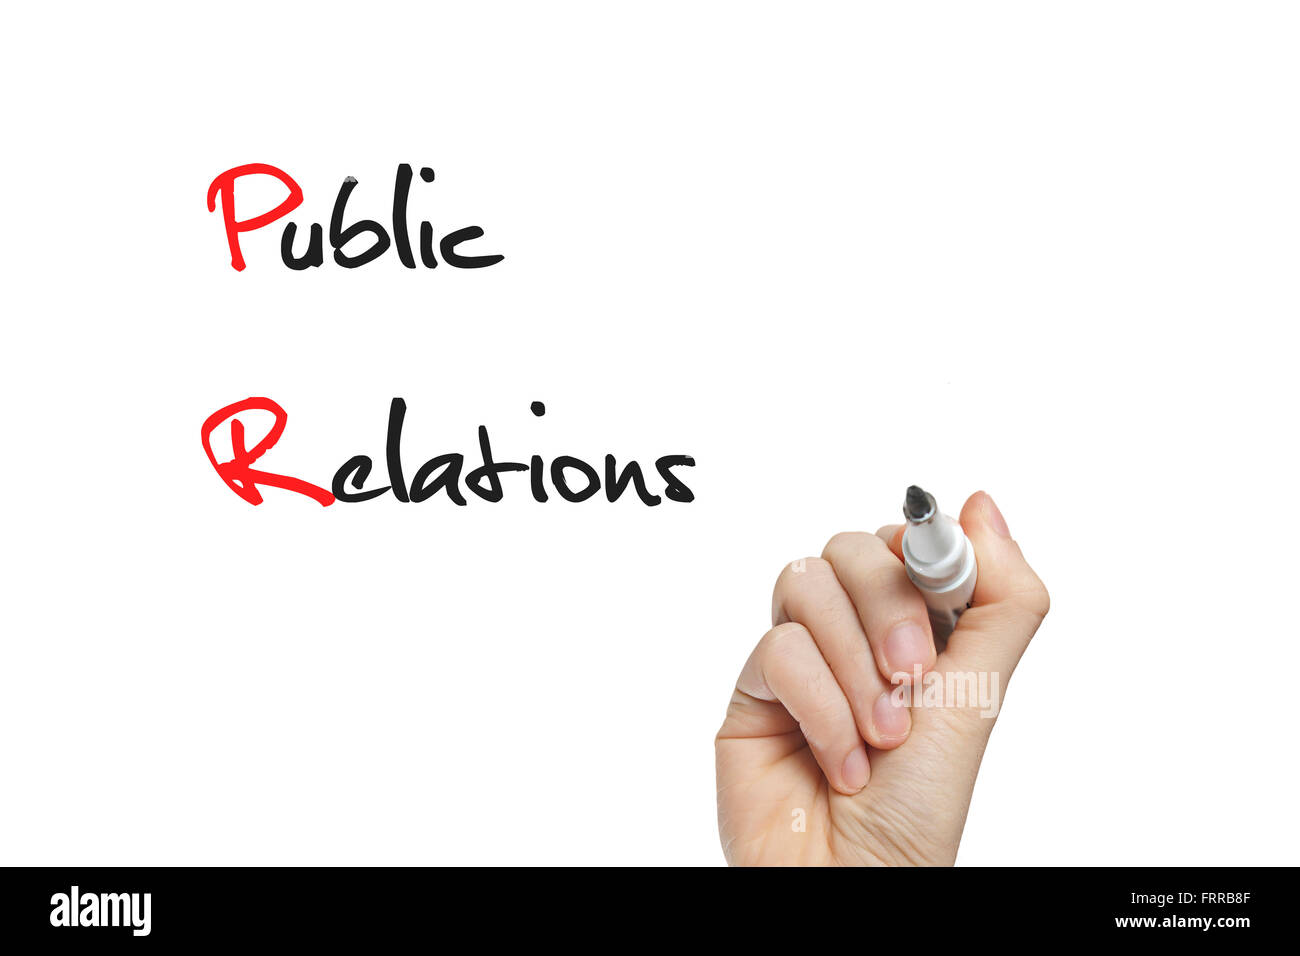 Hand writing public relations on a white board Stock Photo